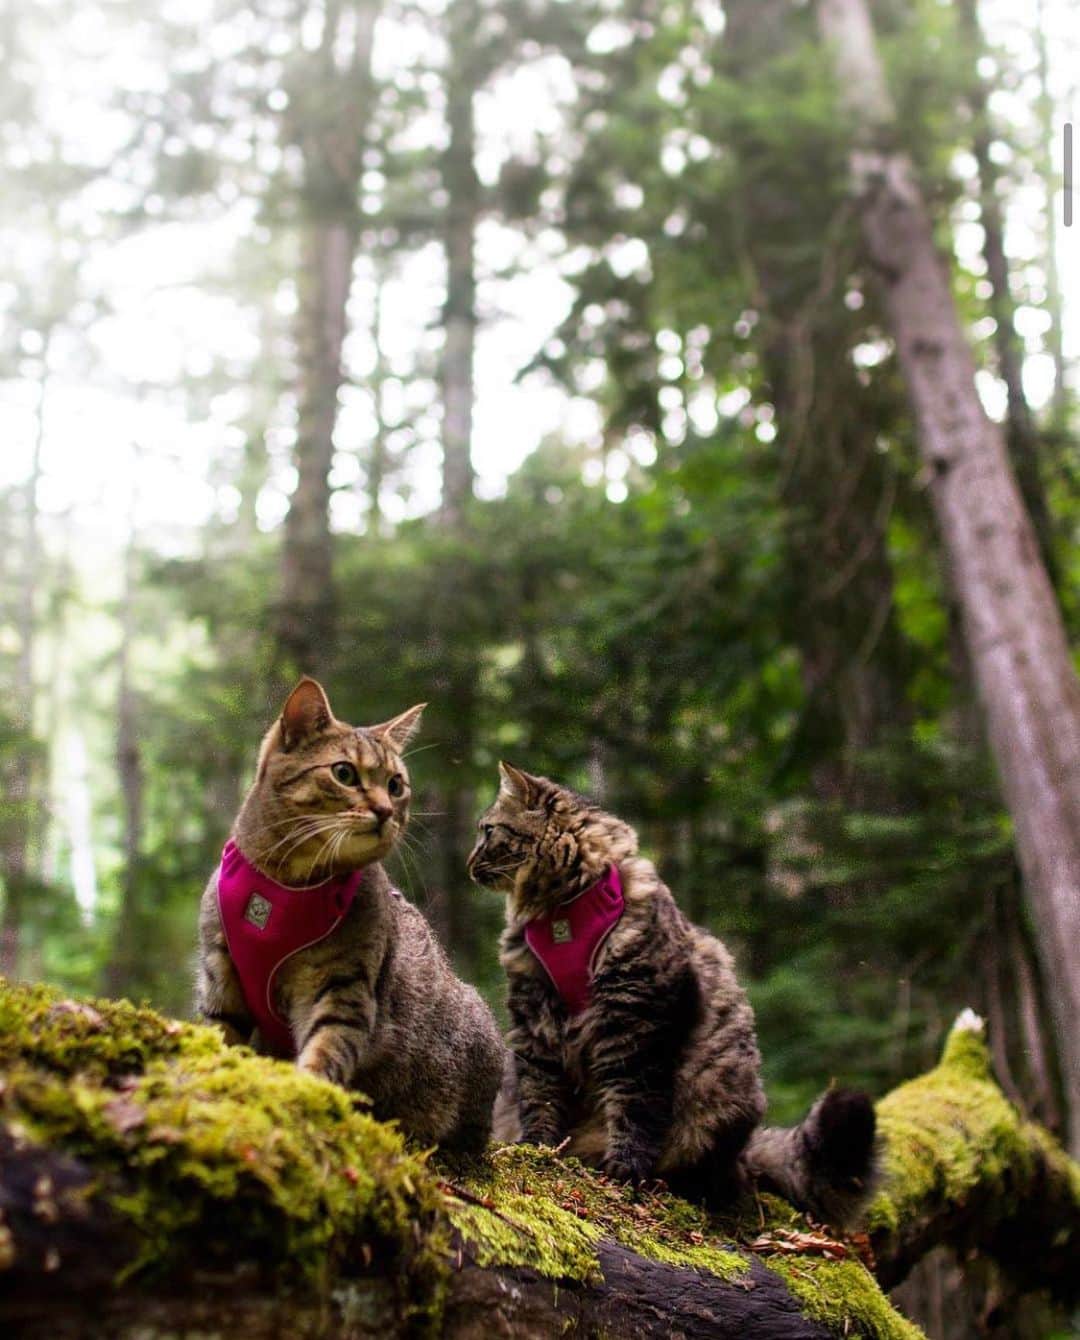 Bolt and Keelのインスタグラム：「BOLT AND KEEL ARE BACK 🐱 ...but just for the week! While they’ve been enjoying retirement, we have partnered with some great people to bring our community of adventure-loving pets and their humans something awesome! • Over our years of intrepid adventure with Bolt and Keel, we’ve learned a lot and have loved sharing our explorations with you. 🙌🏽 • We hope by sharing our adventures with you that we have inspired you to get out and explore — with or without an adventure cat in tow. Although our time on Instagram has come to an end, we want to continue to inspire and share the love of adventure. • That’s why we’re so excited to be taking this next step! We will continue to inspire, share and love adventuring pets from all over the world 🌎  • Are you ready for what’s next? ✌🏽 • Love, Bolt and Keel 🐾」